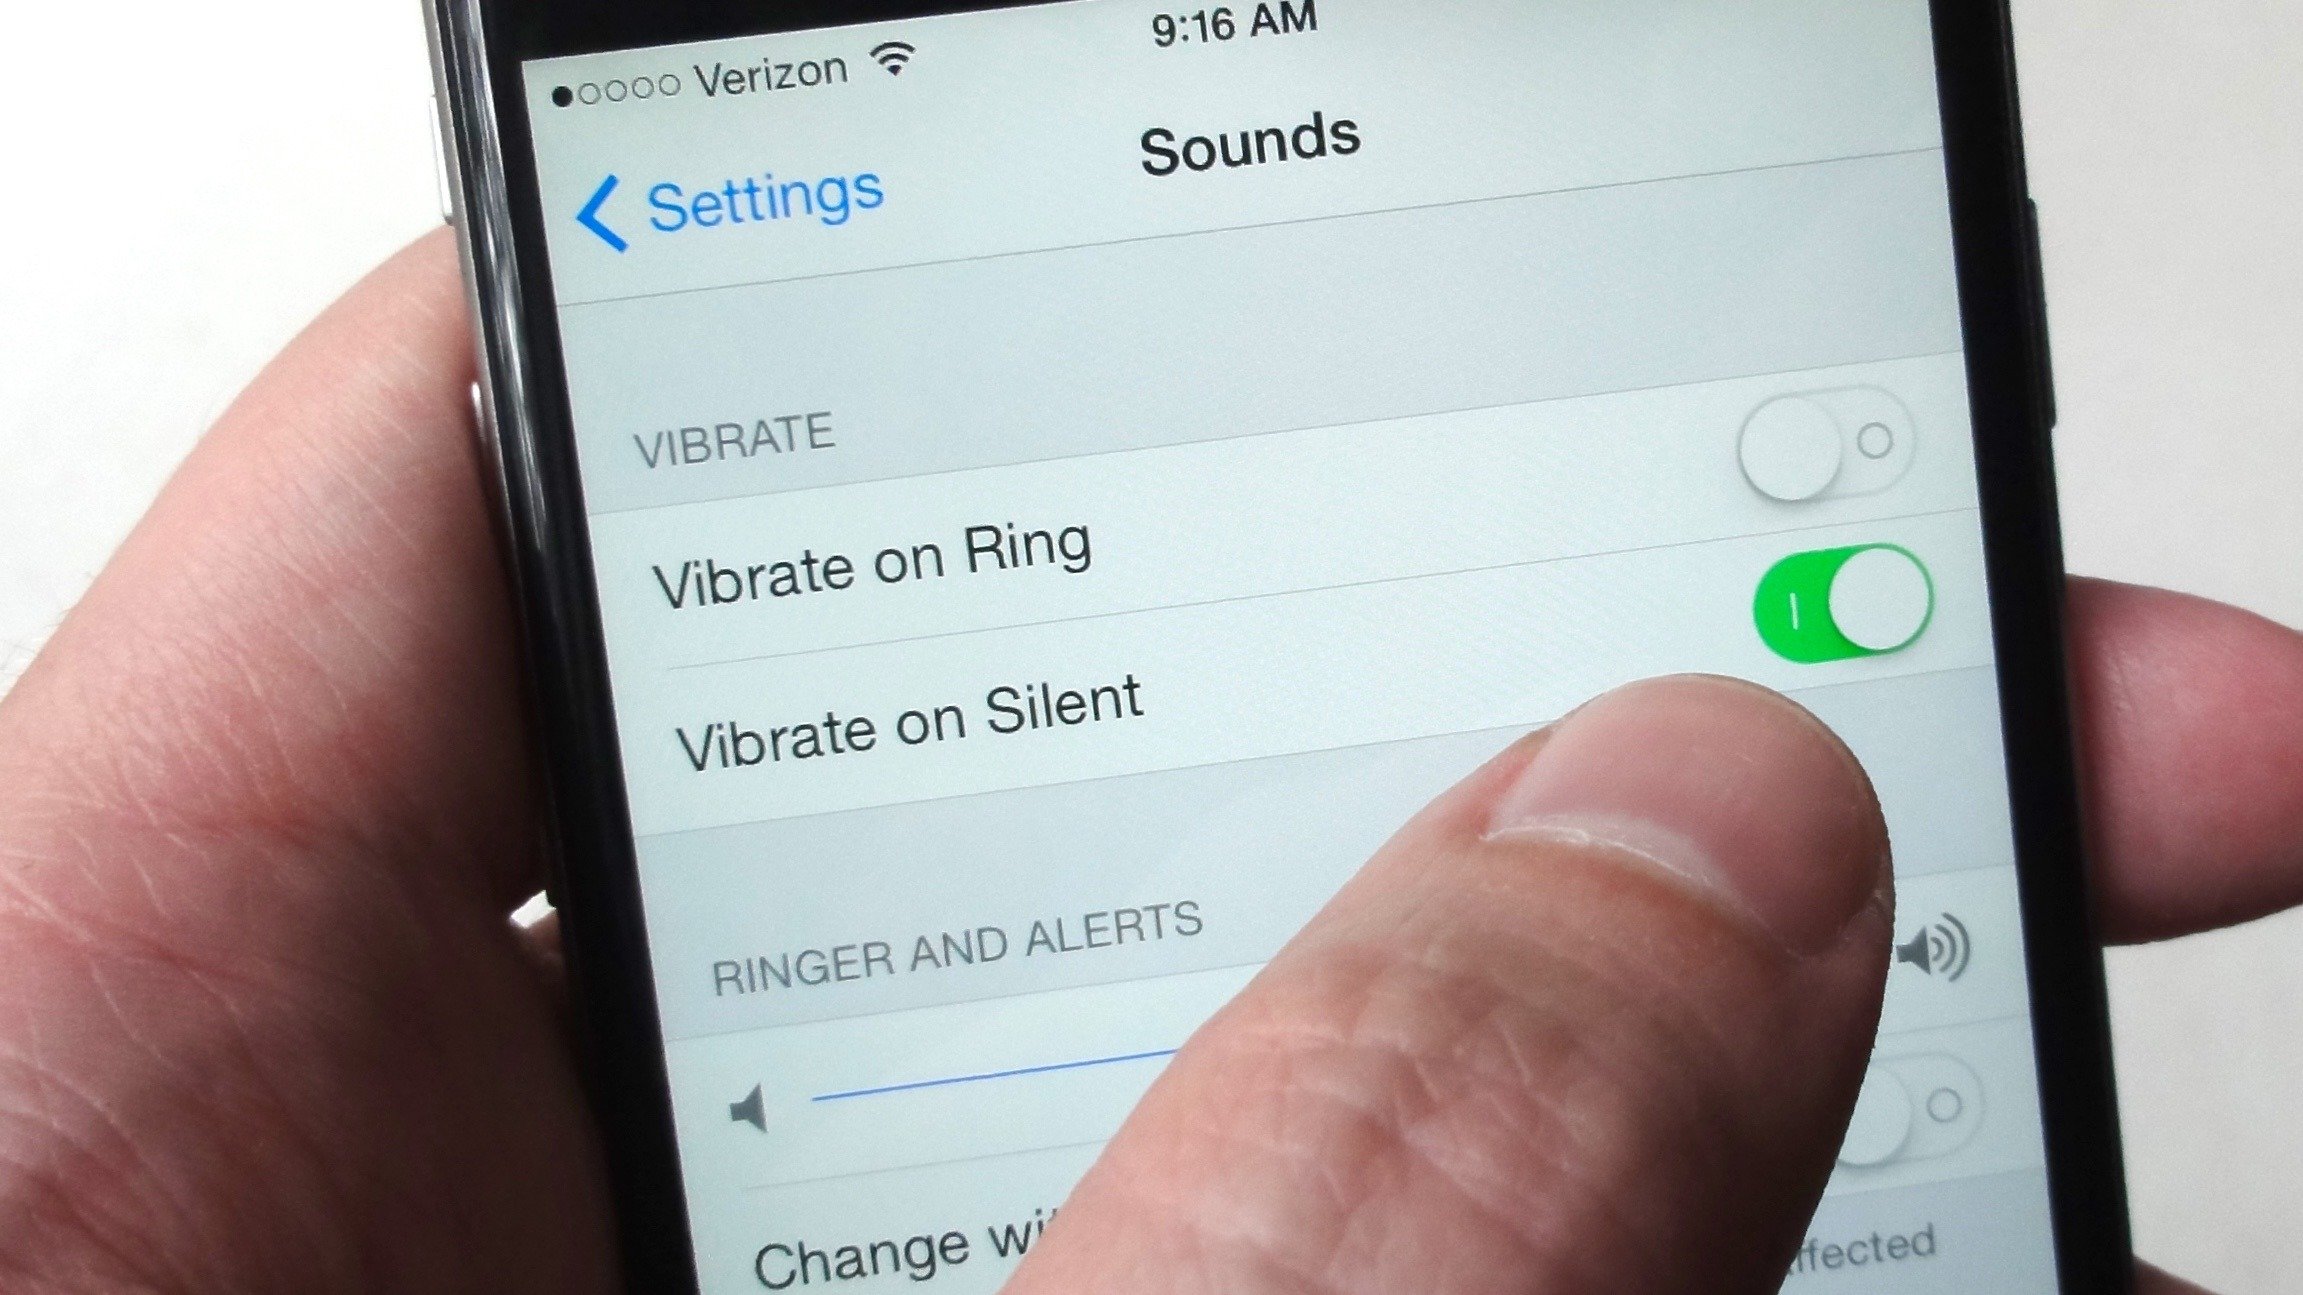 Boost battery life: Turn off Phone Vibration iphone